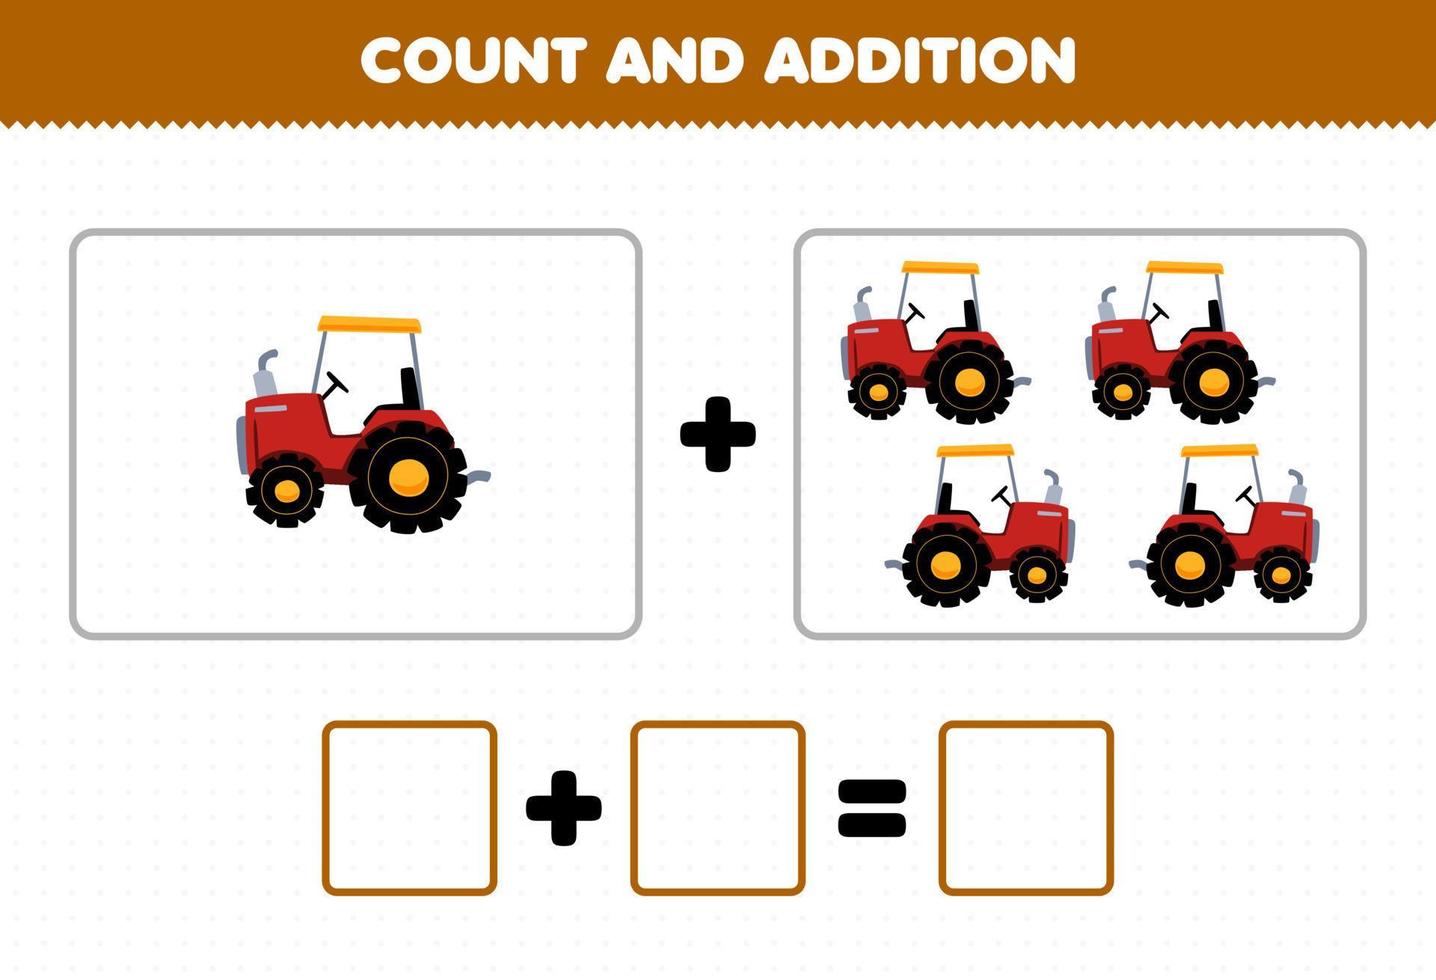 Education game for children fun addition by counting cute cartoon tractor pictures printable farm worksheet vector